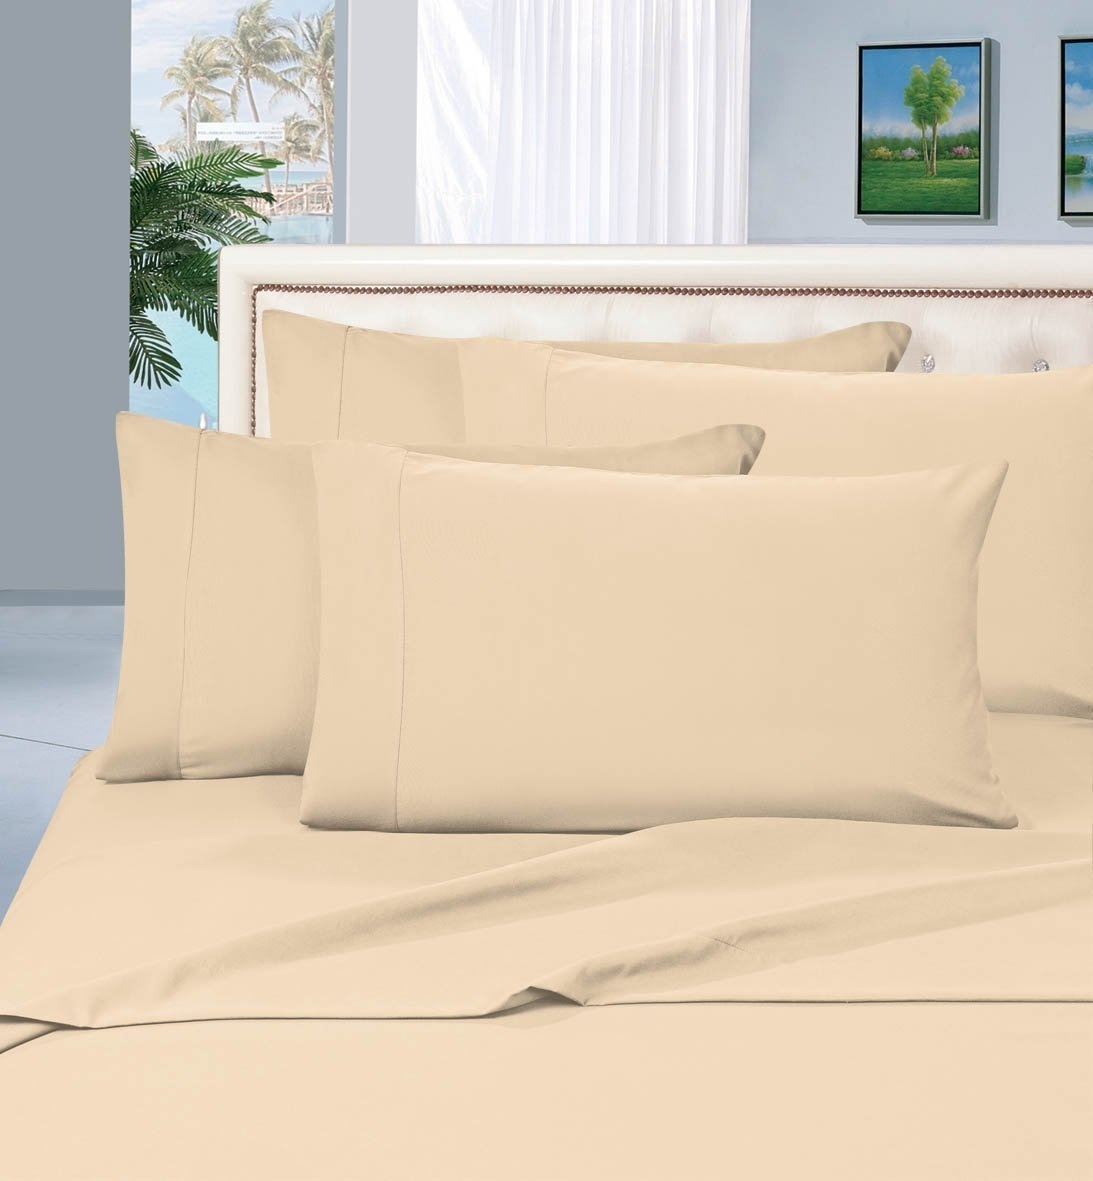 Elegant Comfort 1500 Series Wrinkle Resistant Egyptian Quality Hypoallergenic Ultra Soft Luxury 4-piece Bed Sheet Set, Queen, Cream